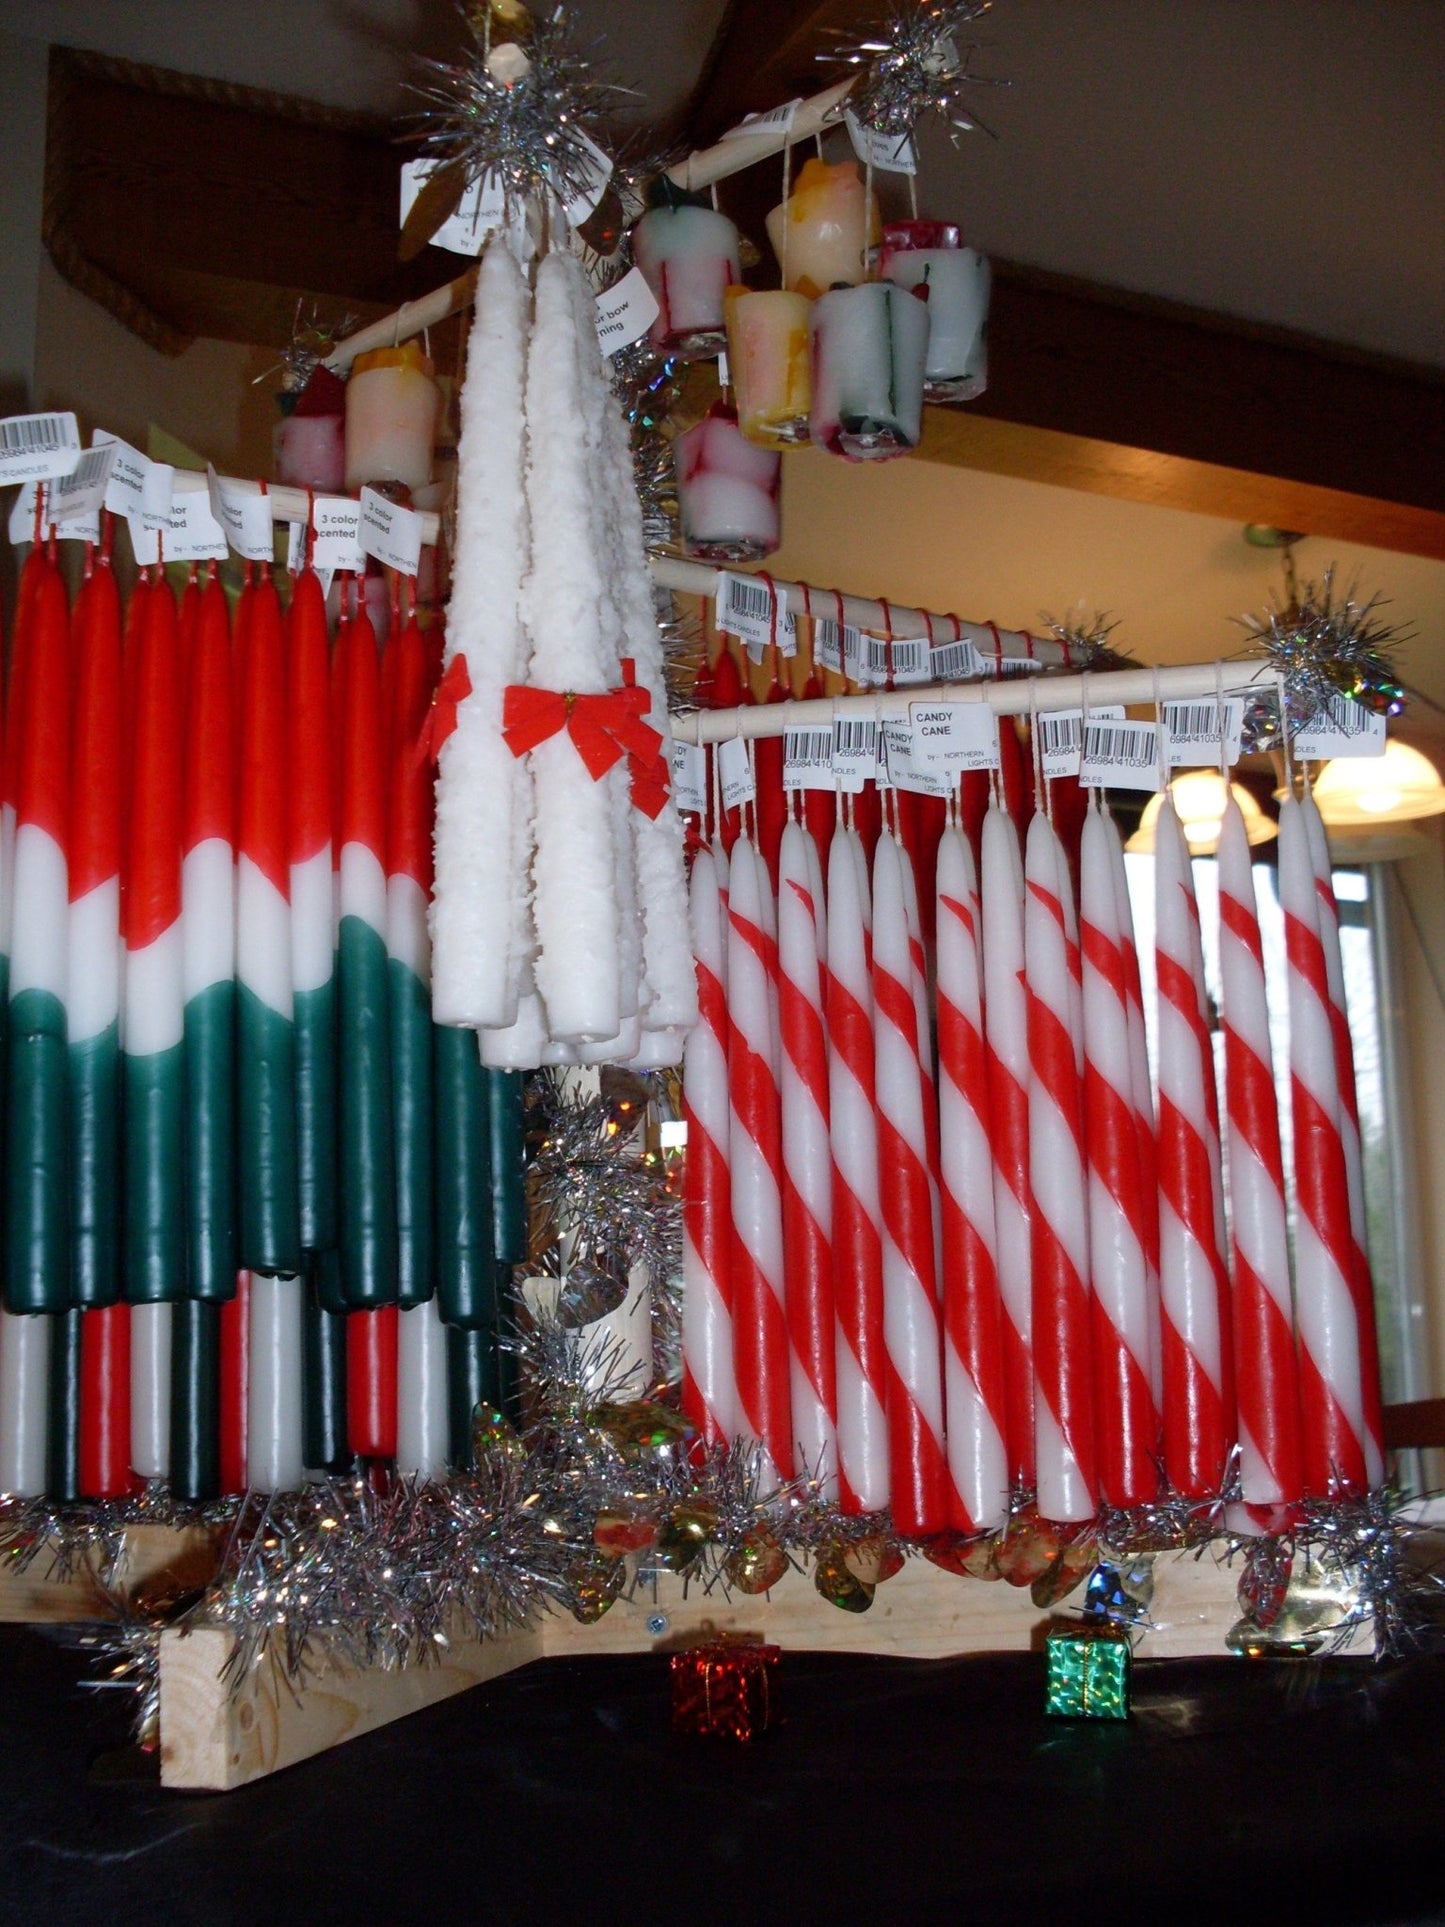 Candy Cane Taper candles, 7/8D x 10"H, Fragrance Free, 2 pair(4 singles) or 6 pair box - Fanny Bay Candle Company